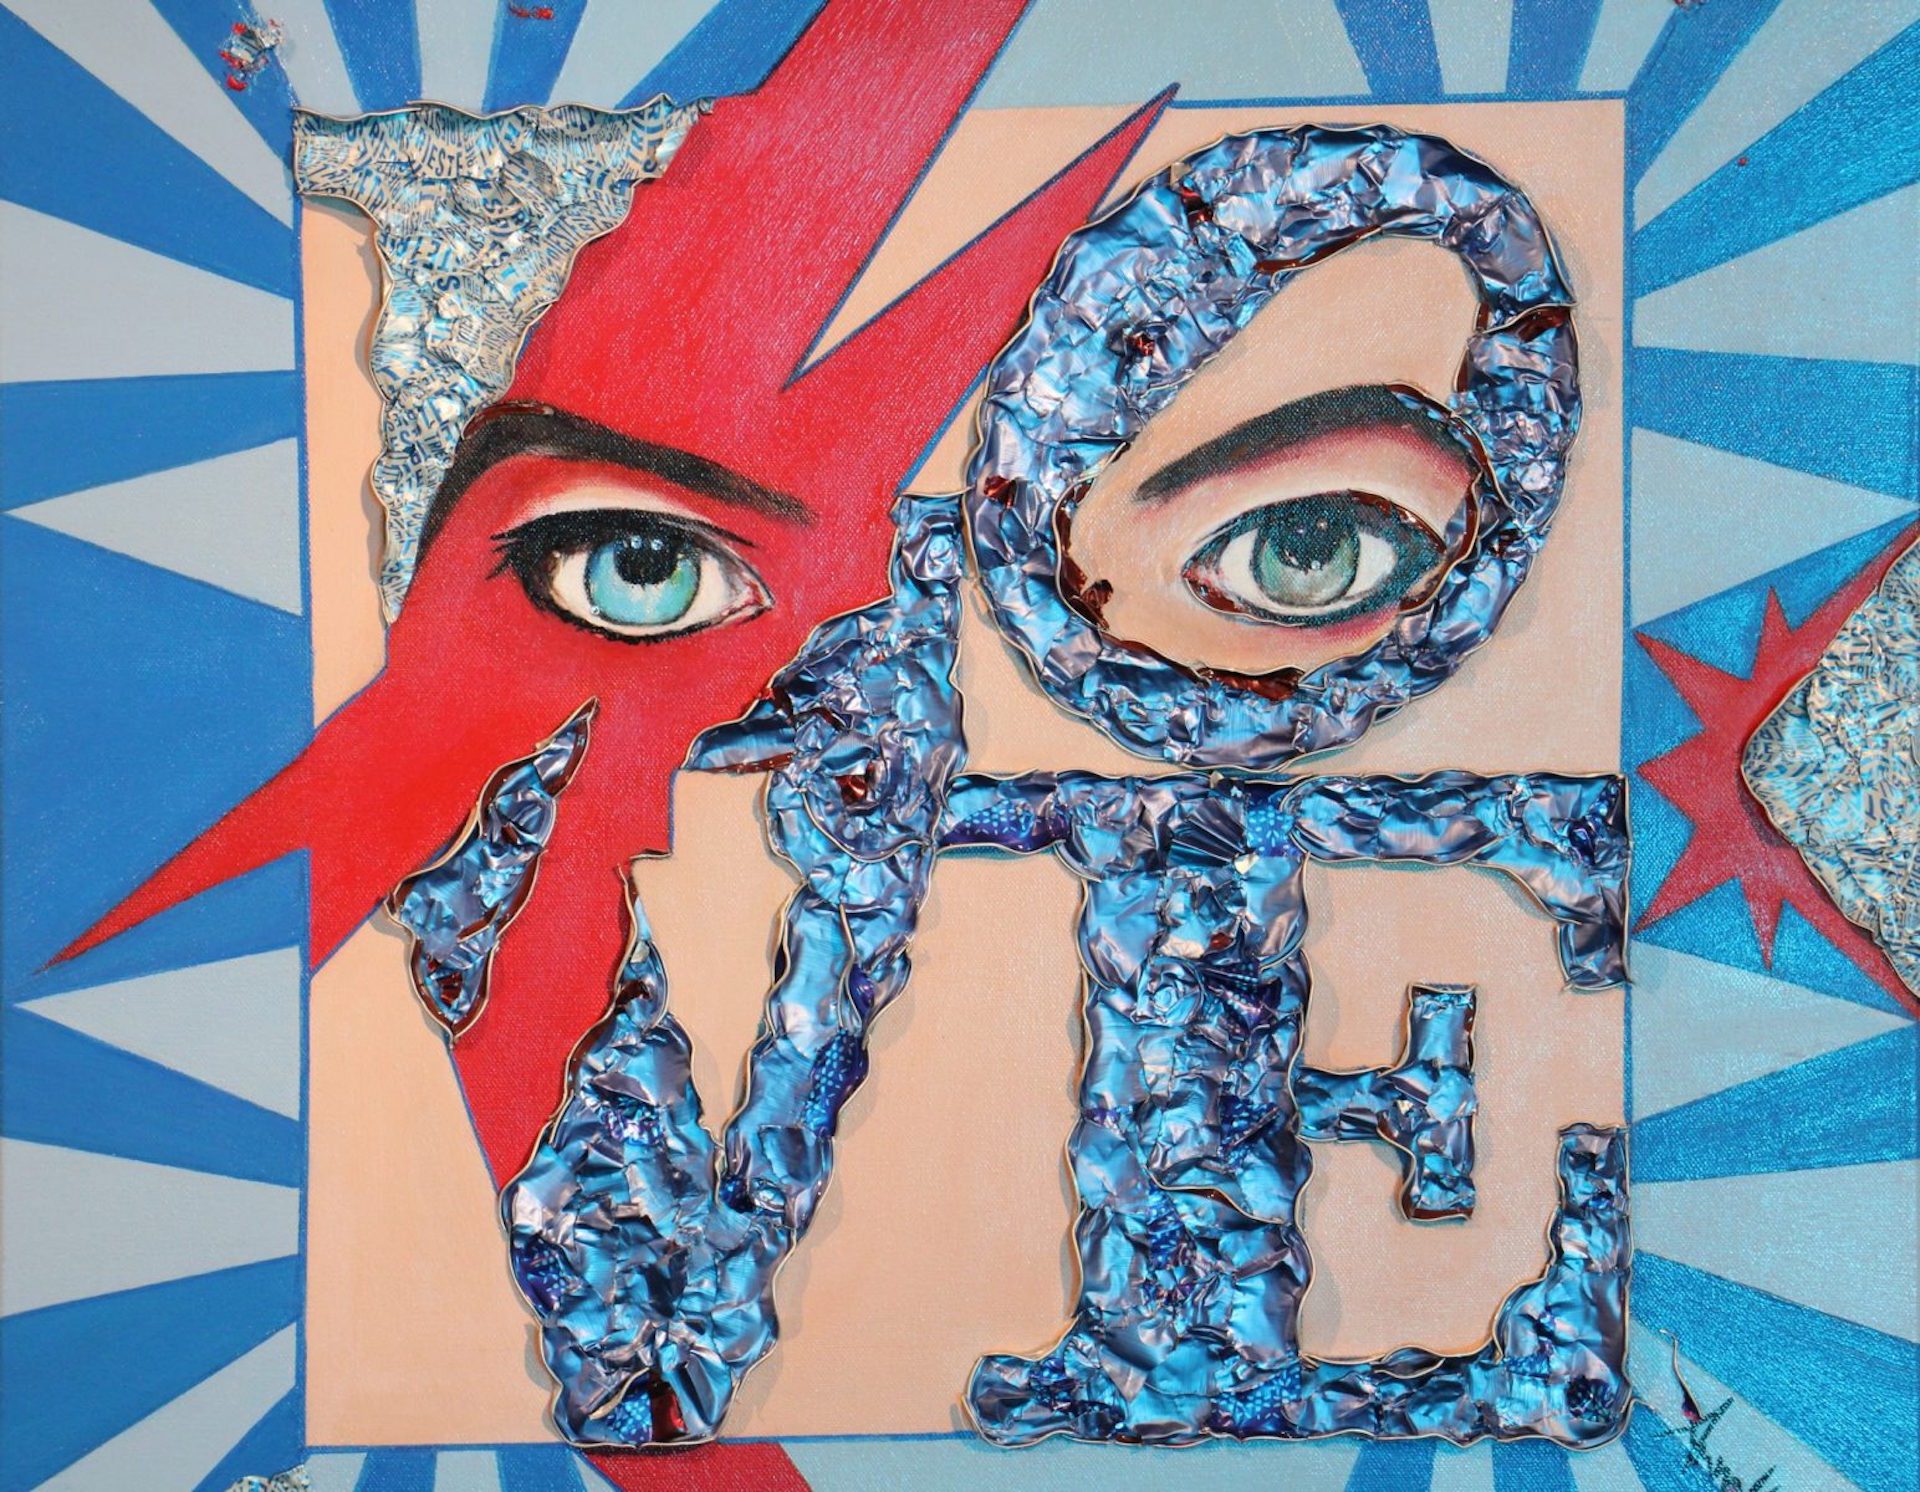 ‘Bowie Forever’ by Annabel Perrigueur incorporates pieces of beer cans.